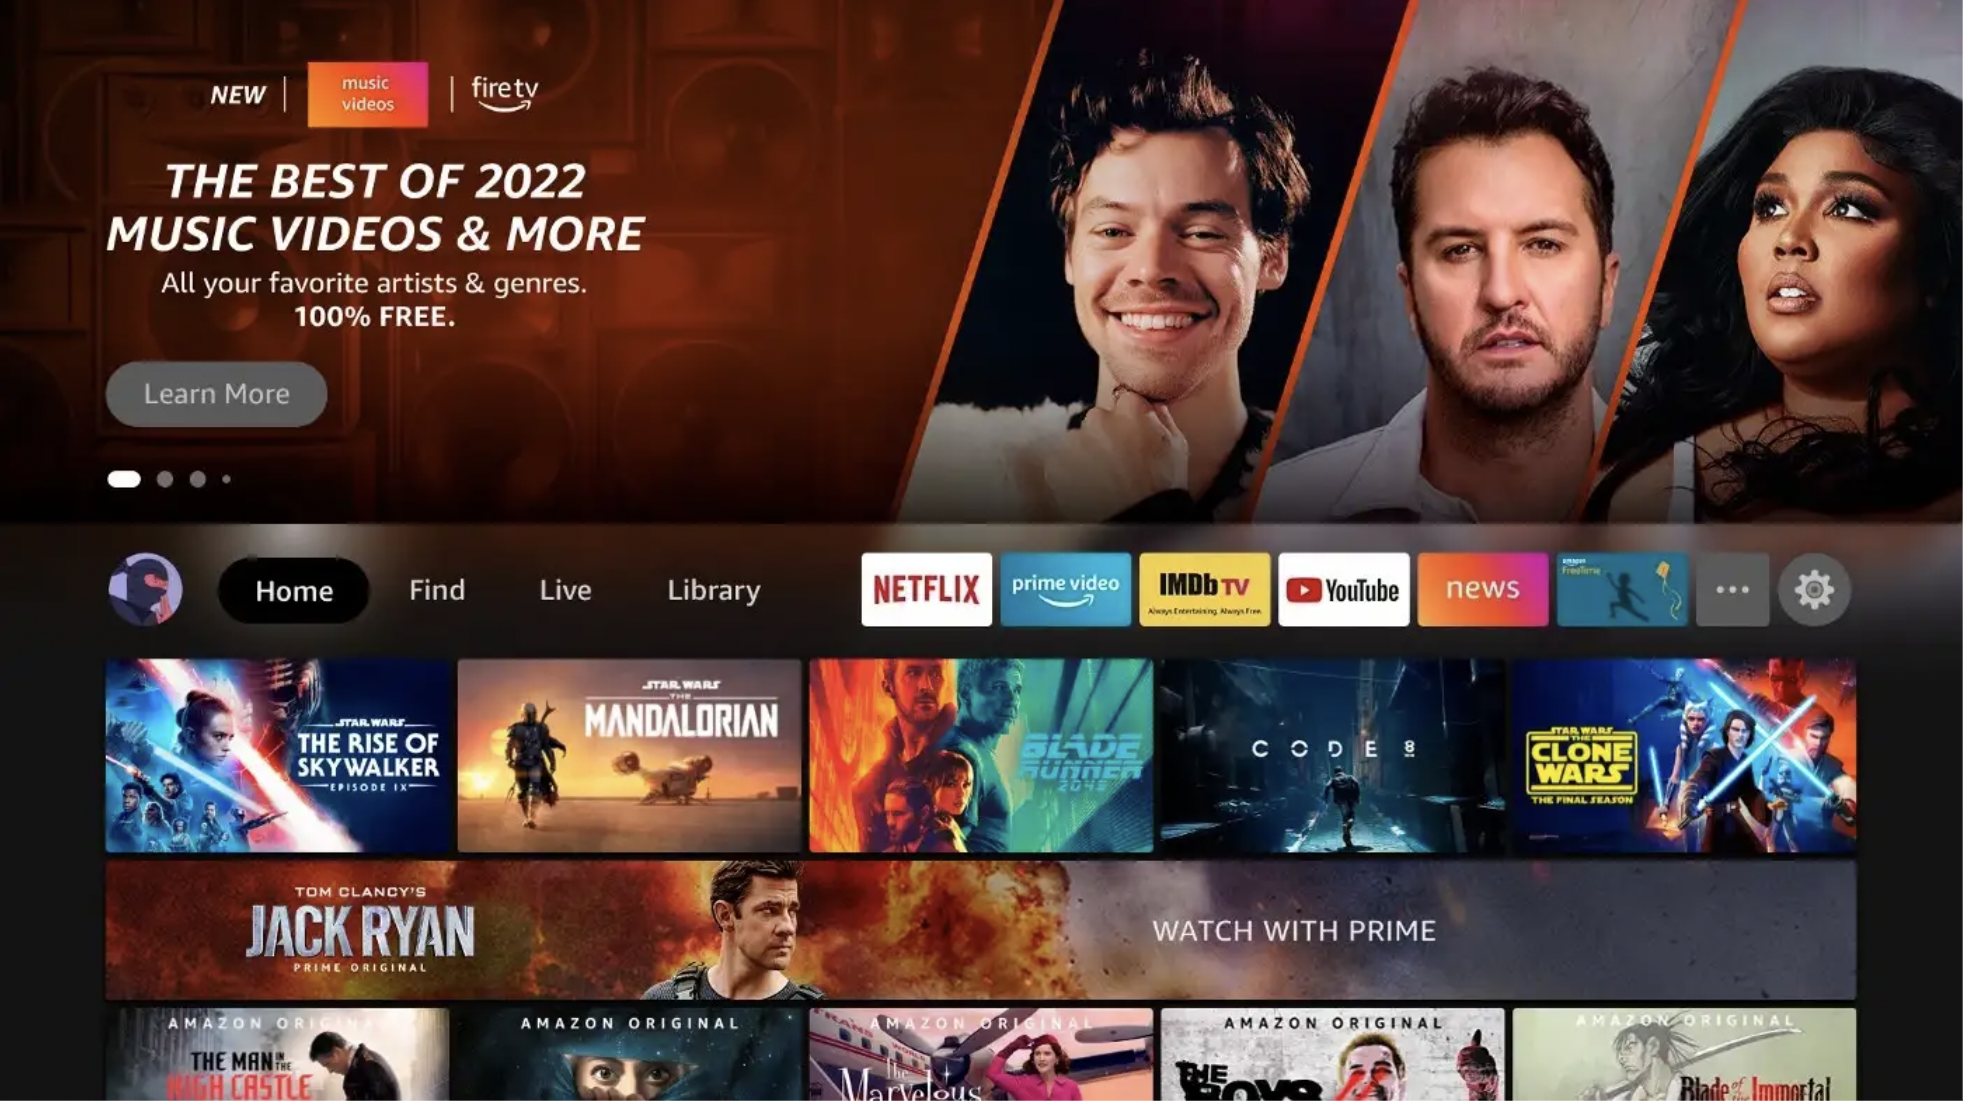 Amazon adds free music videos, viral videos and more ad-supported content  to Fire TV | TechCrunch